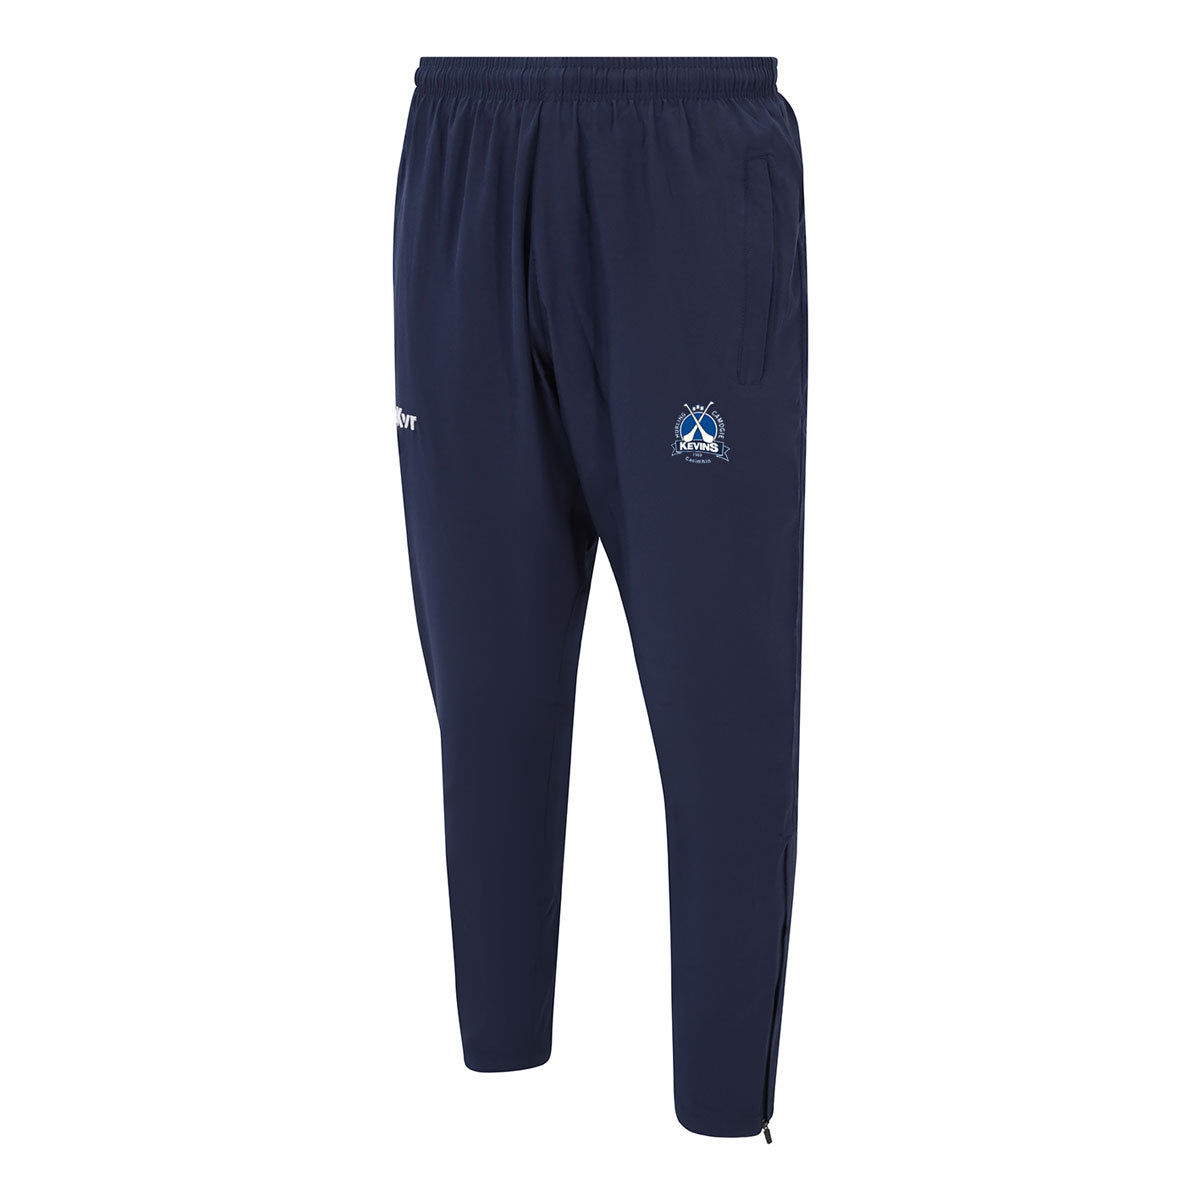 Mc Keever Kevins Hurling & Camogie Dublin Core 22 Tapered Pants - Adult - Navy